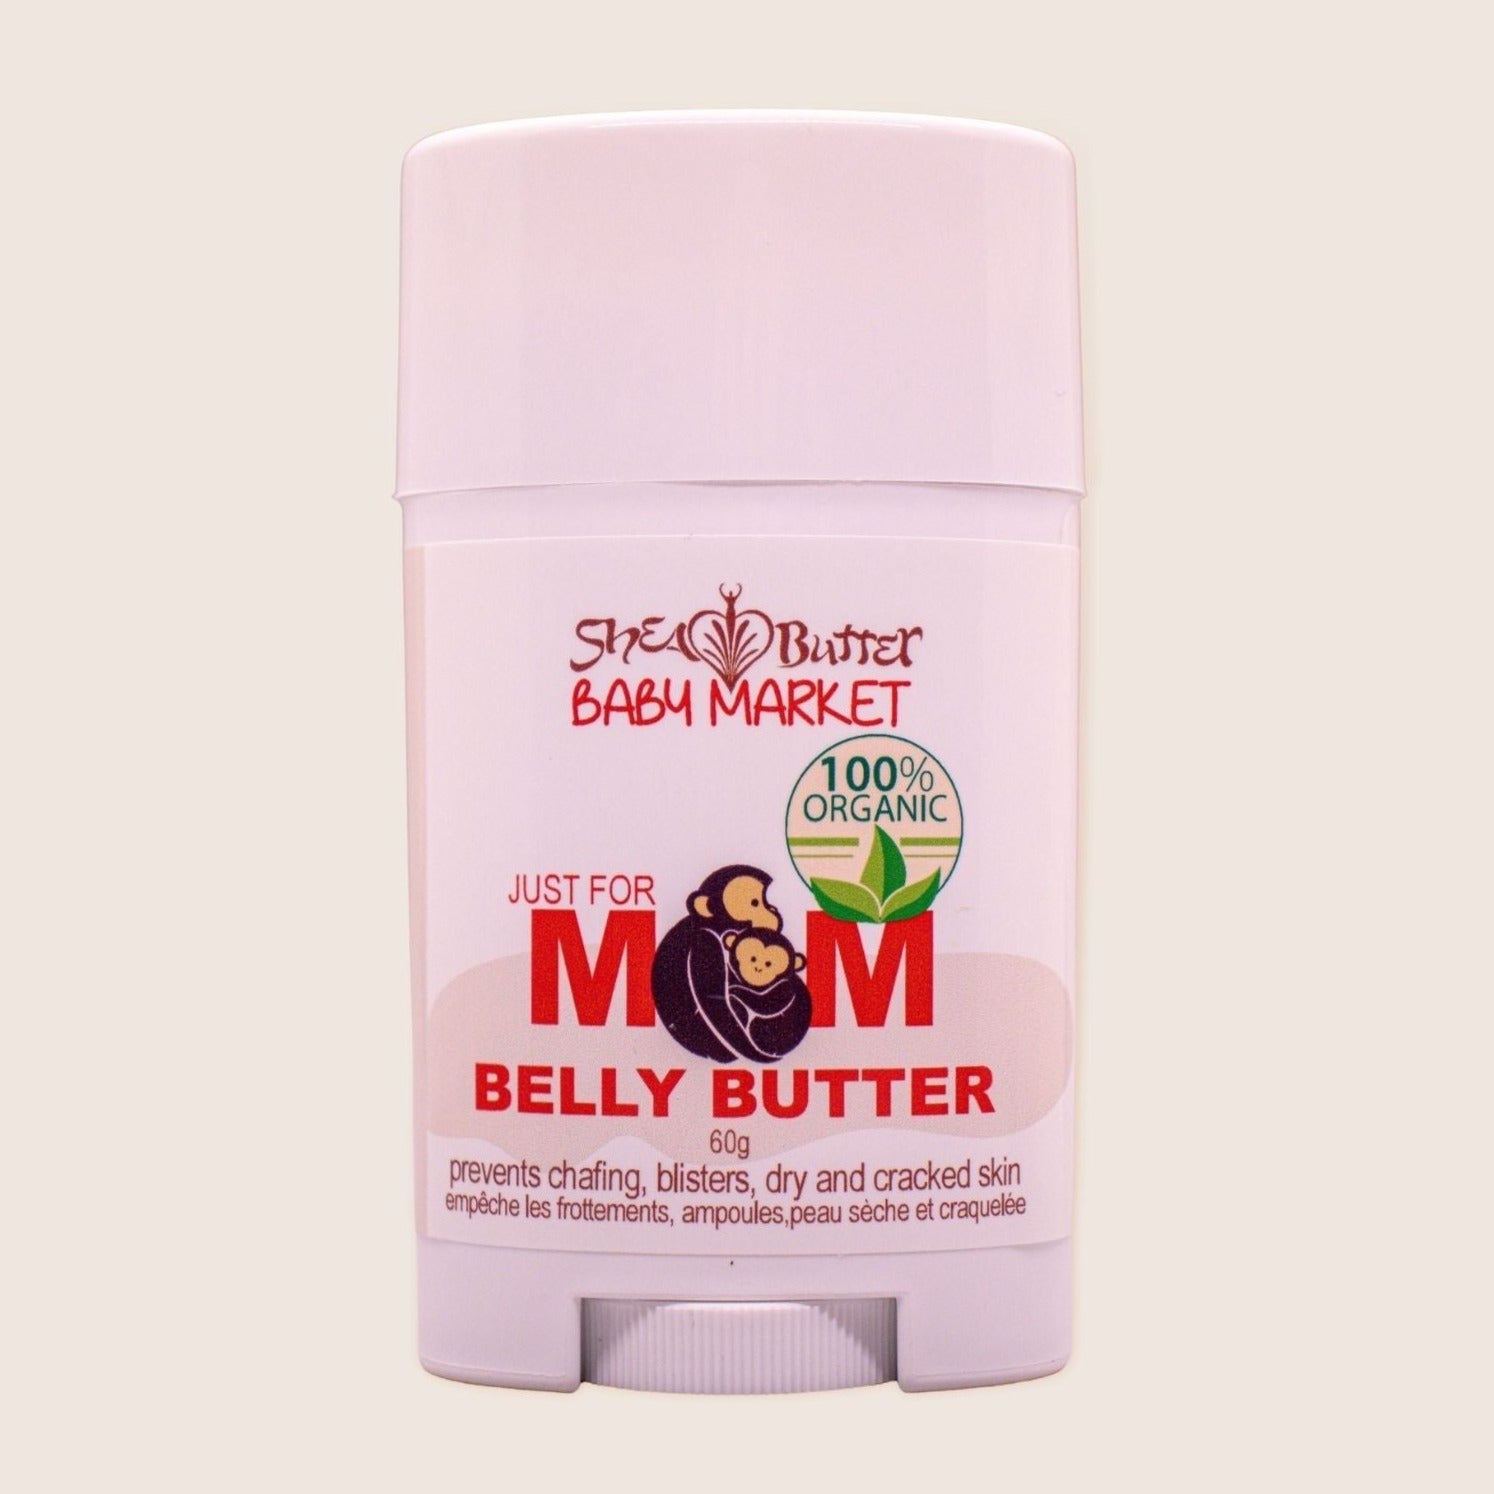 Just For Mom - Belly Butter by Shea Butter Market